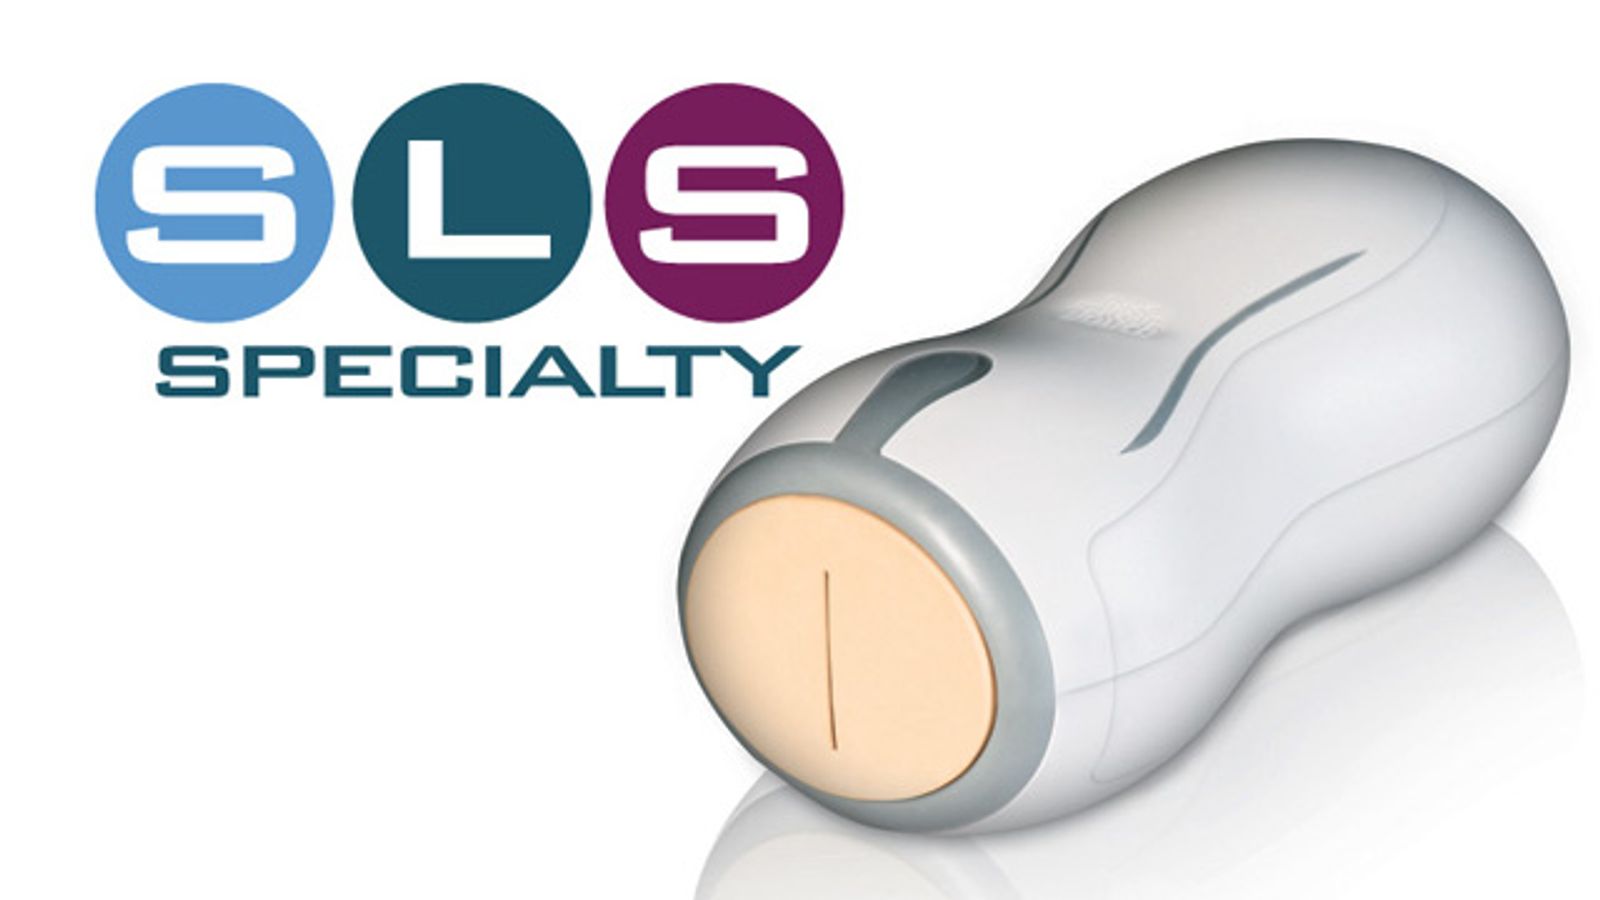 SLS Specialty Brings RealTouch Sex Emulator to Adult, Gay Retail Markets